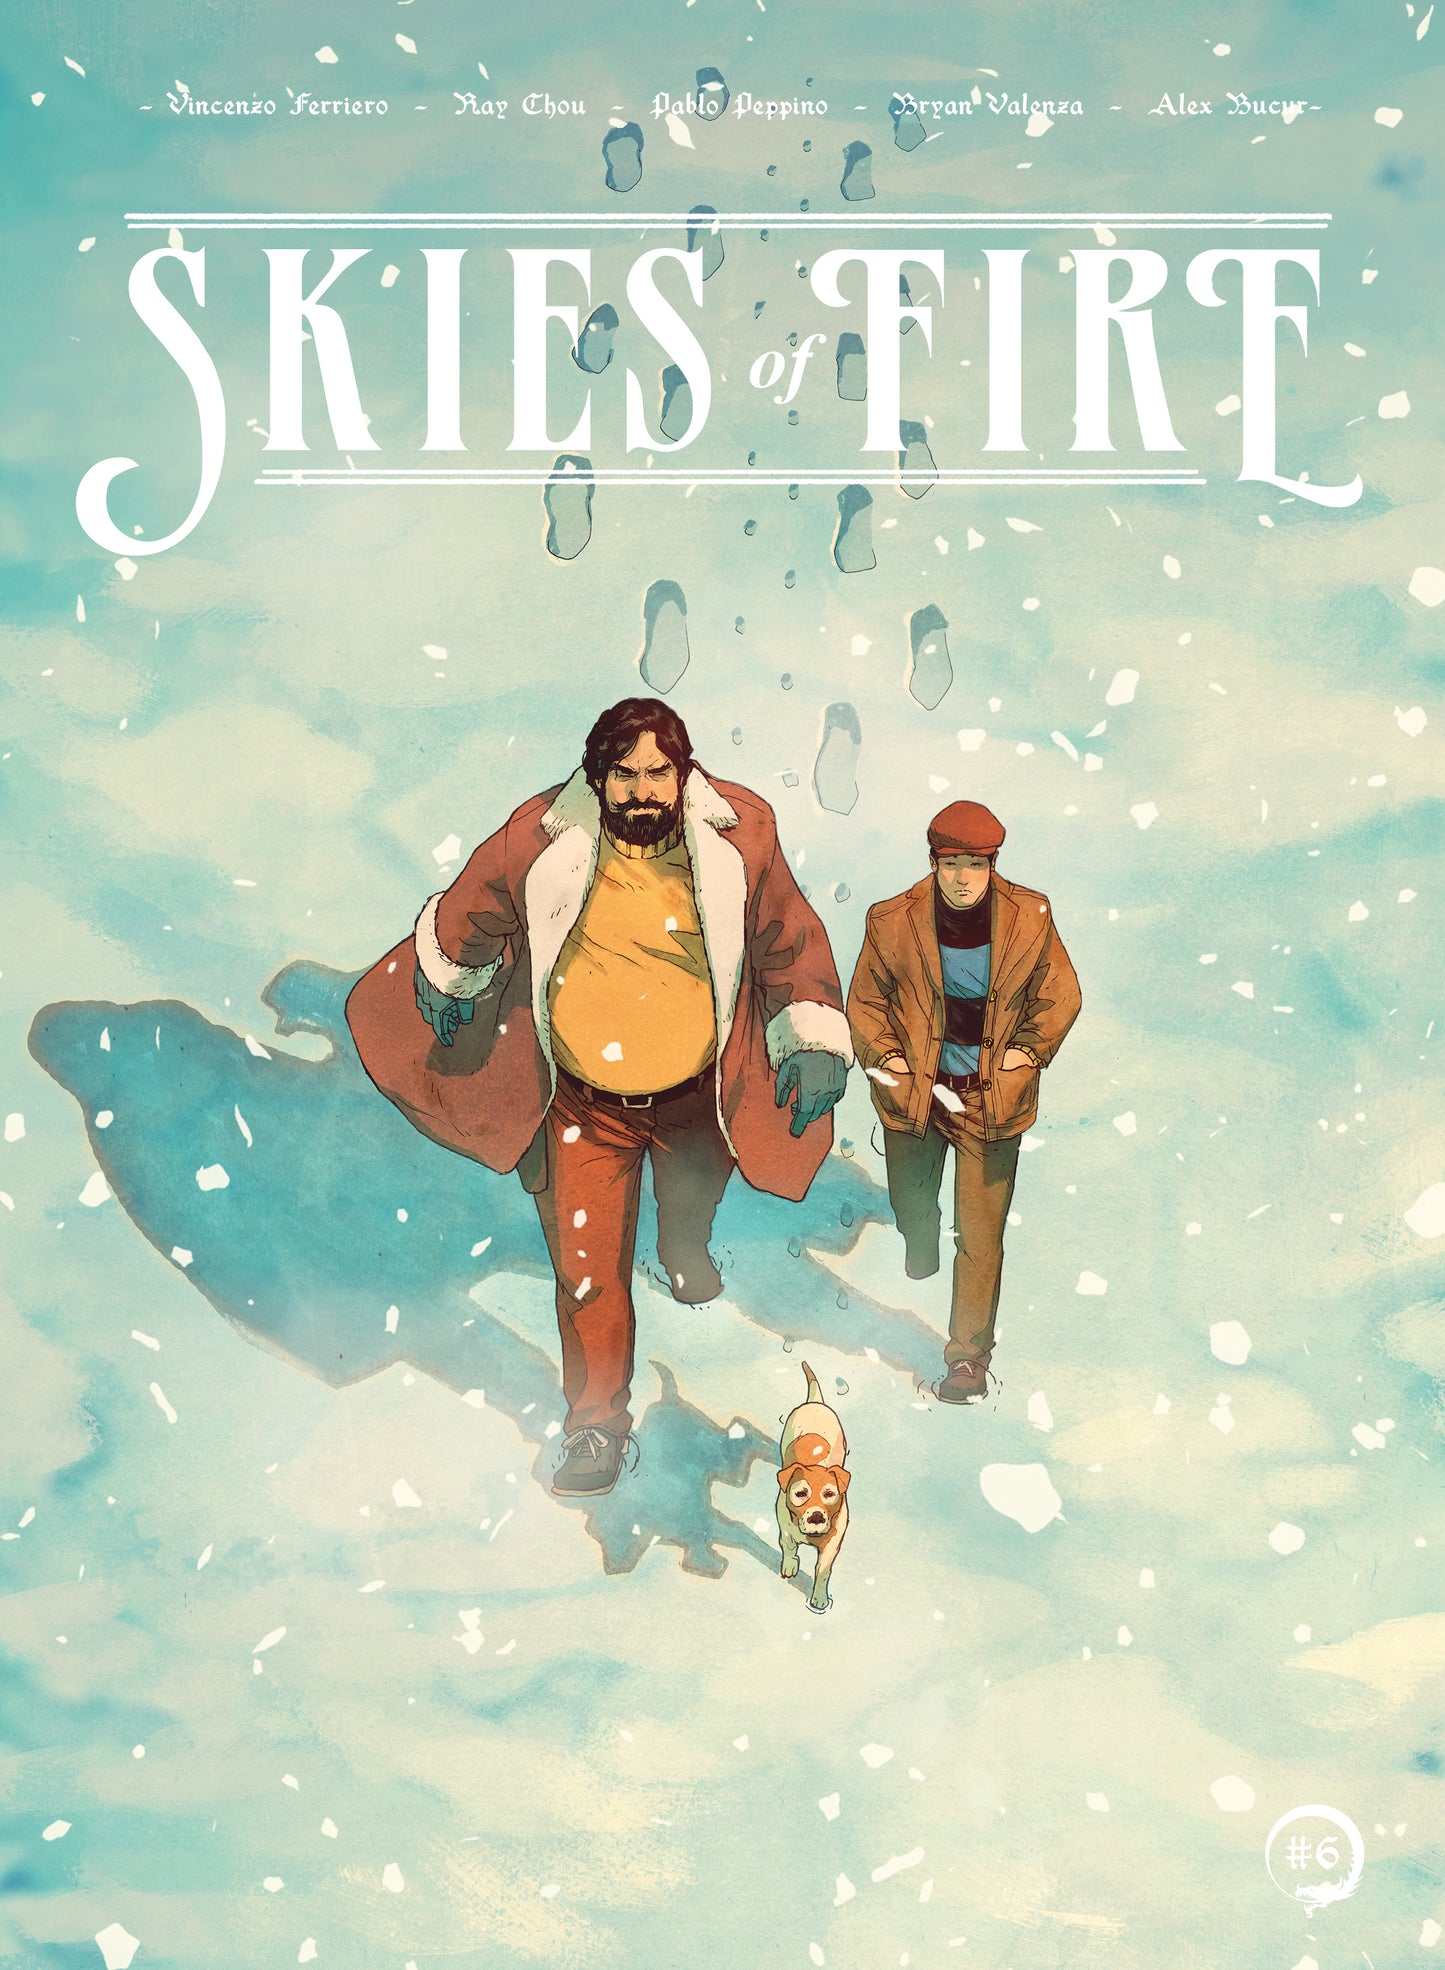 Skies of Fire: Single Issues